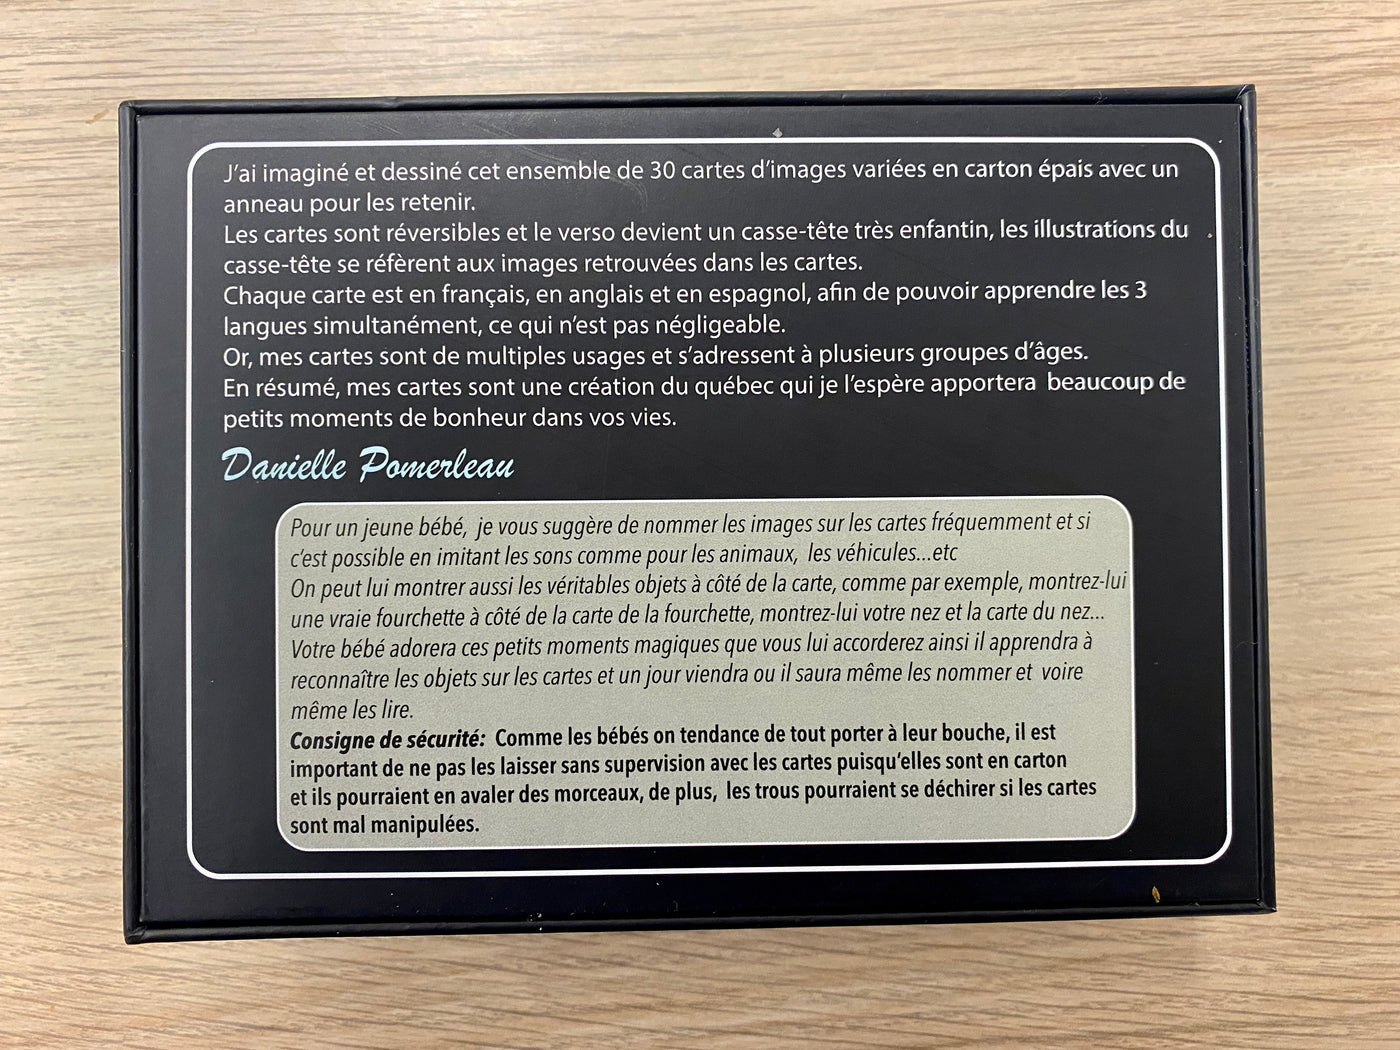 Series Green: Learning Cards in 3 languages (English, French, Spanish)